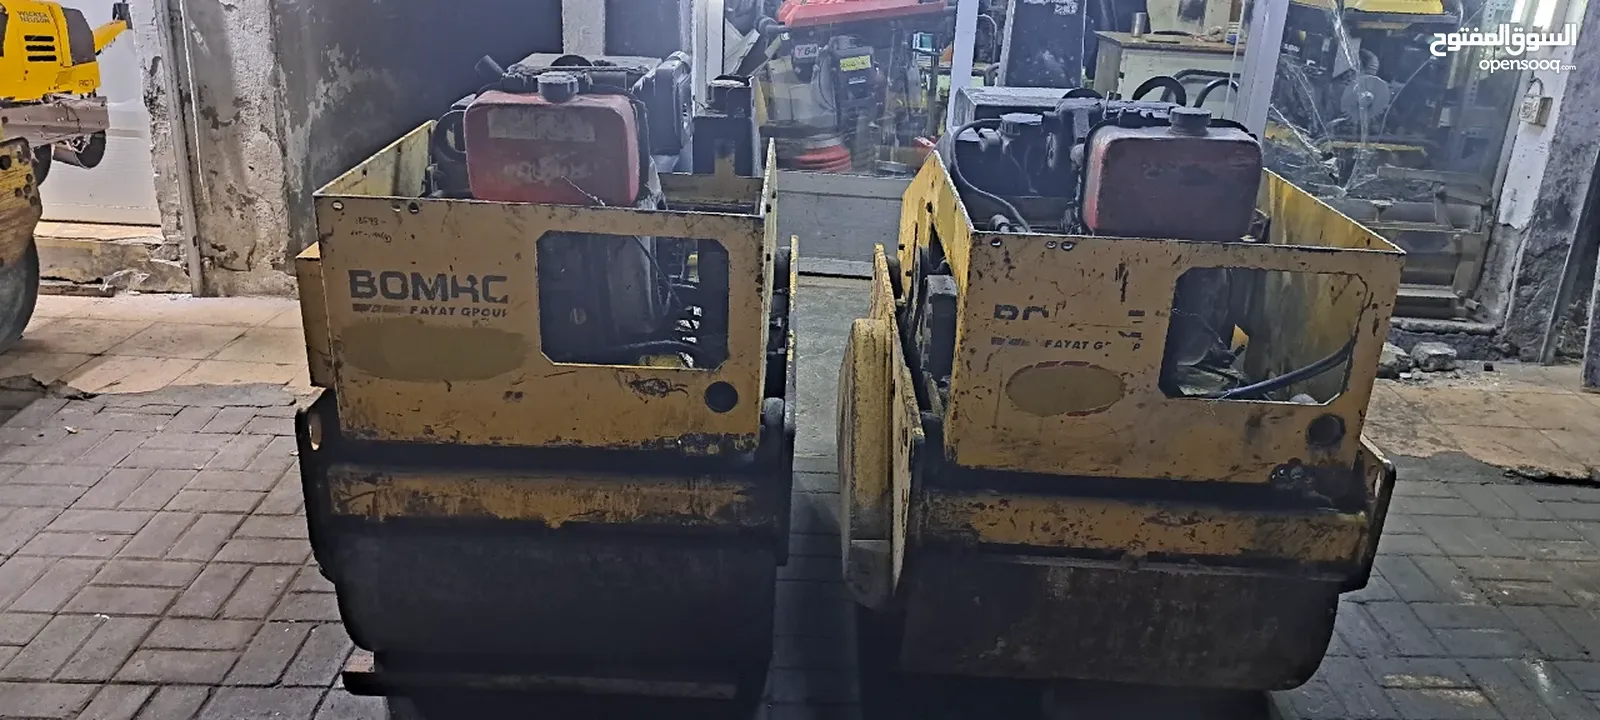 Roller compactor 2 pics for sale